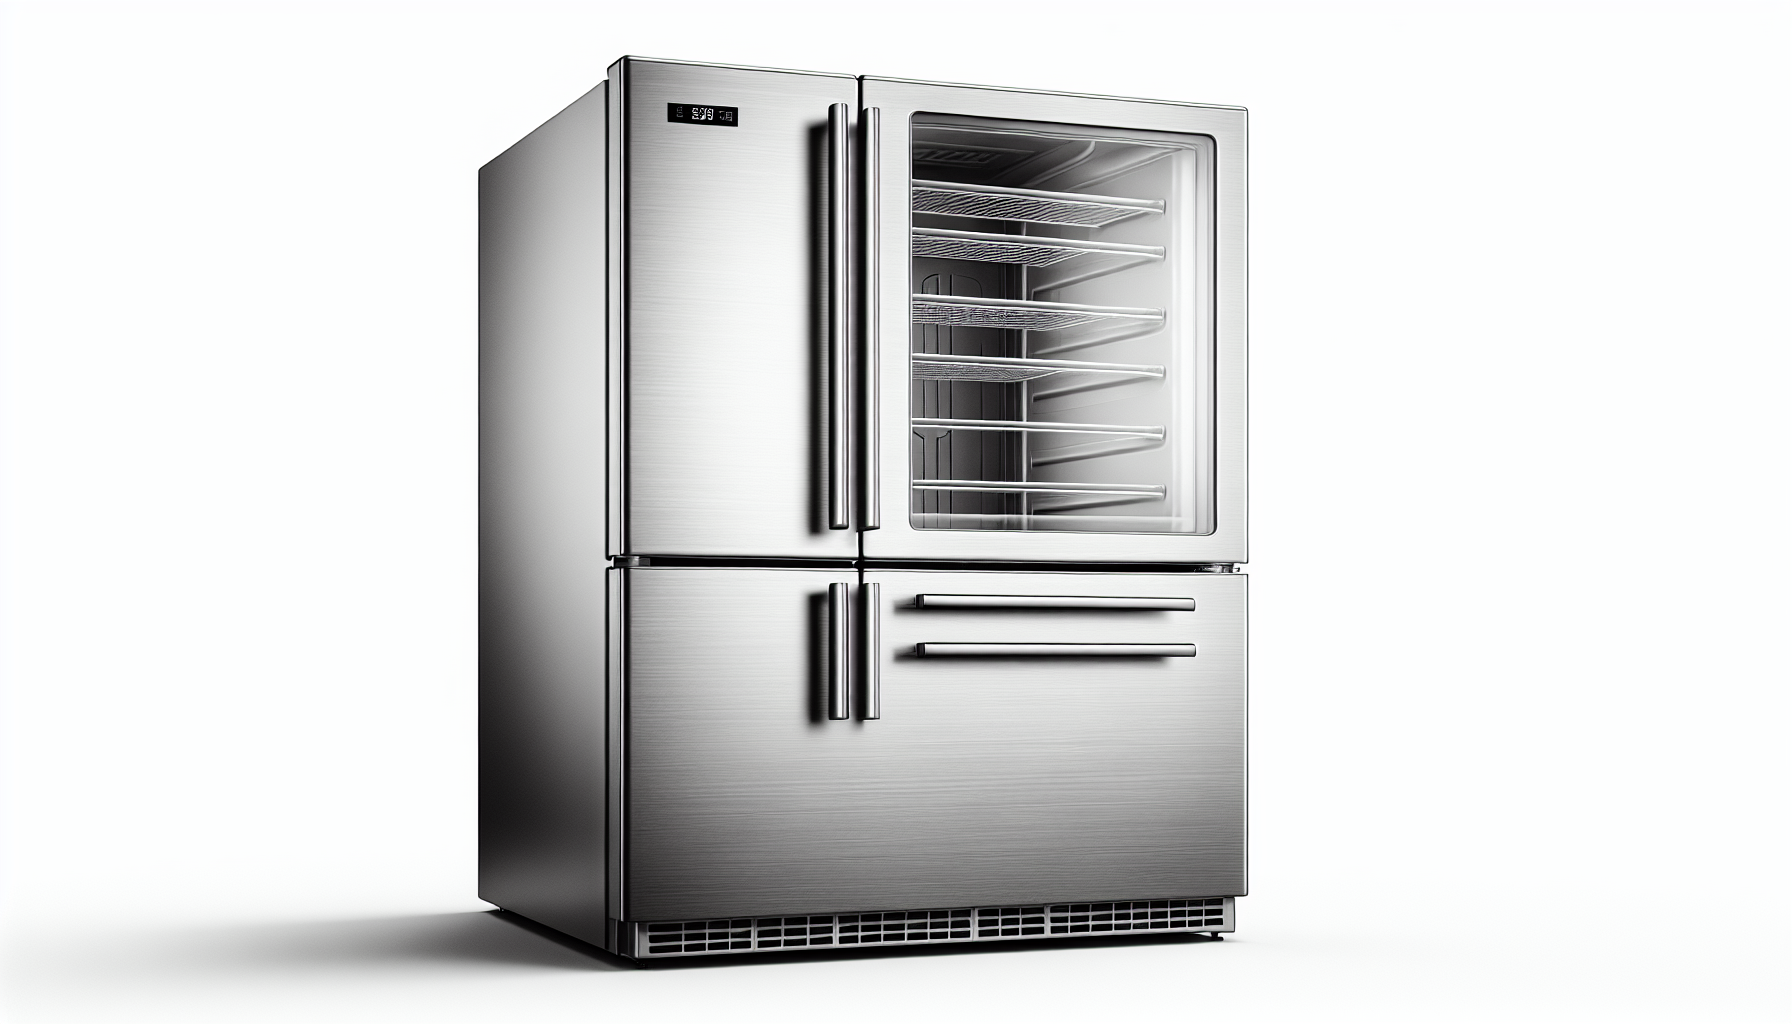 Choosing the Right Freezer Size for a Family of 4